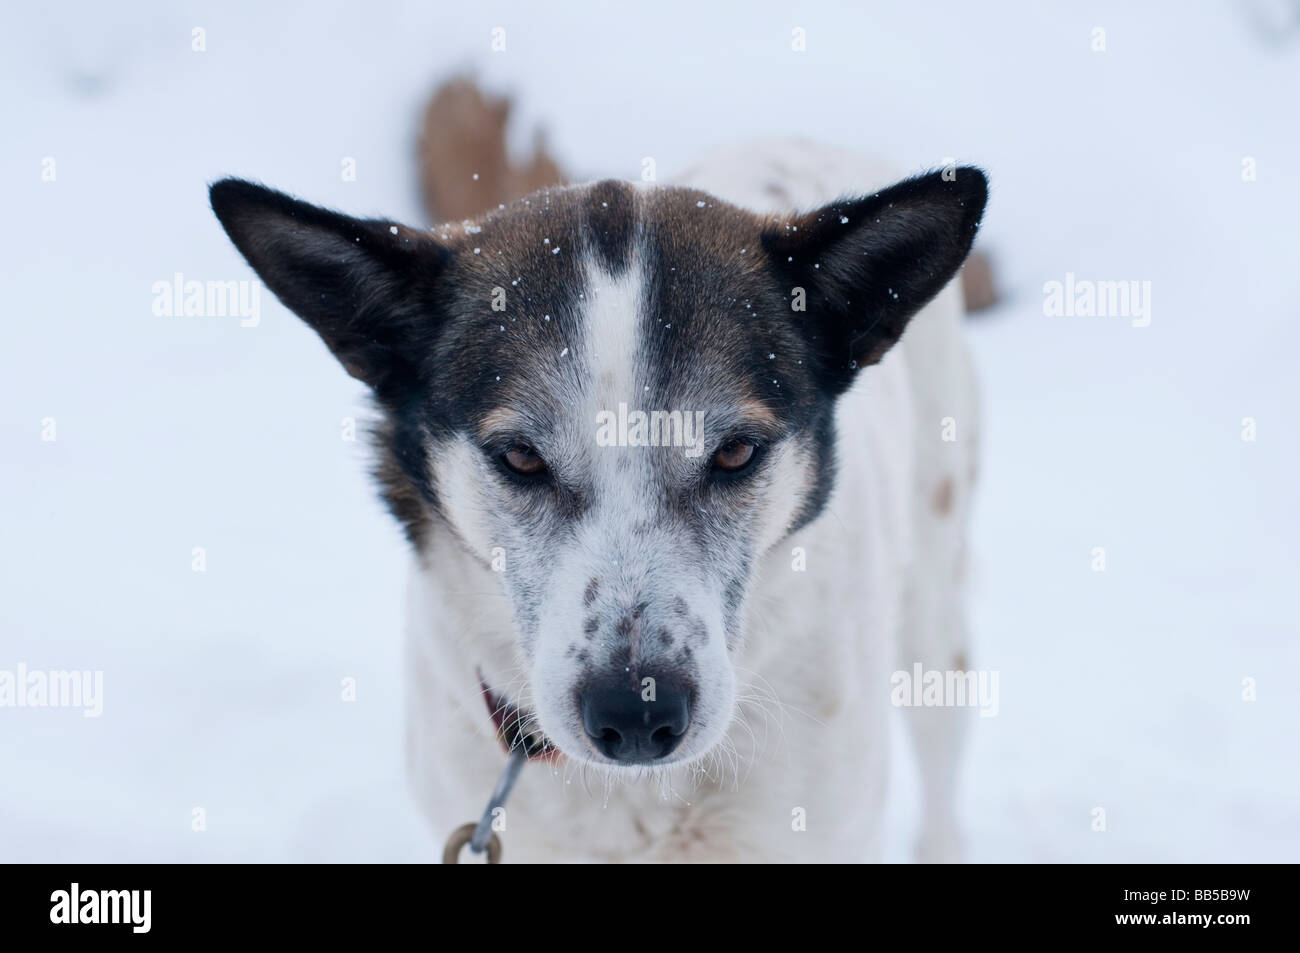 Dog sledding in the snow at the Lake Louise Mountain Resort in Canada Stock Photo